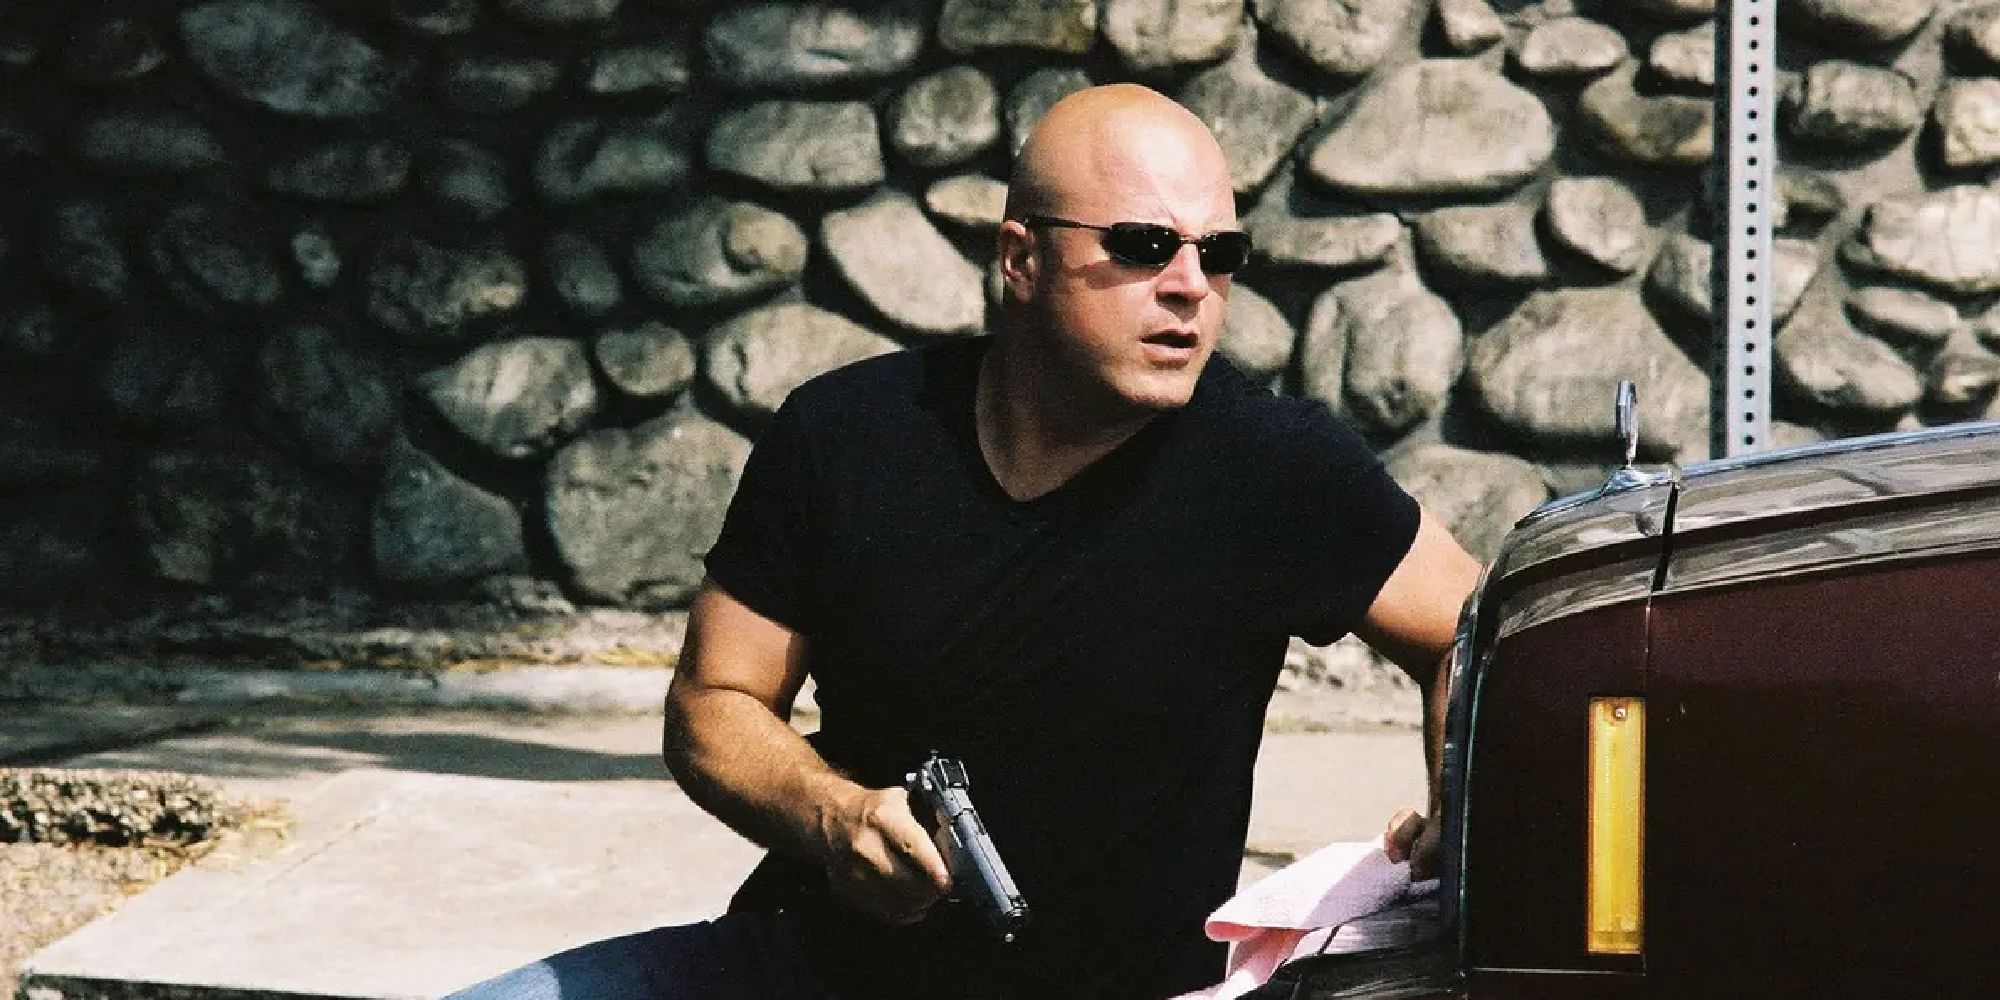 Michael Chiklis in The Shield